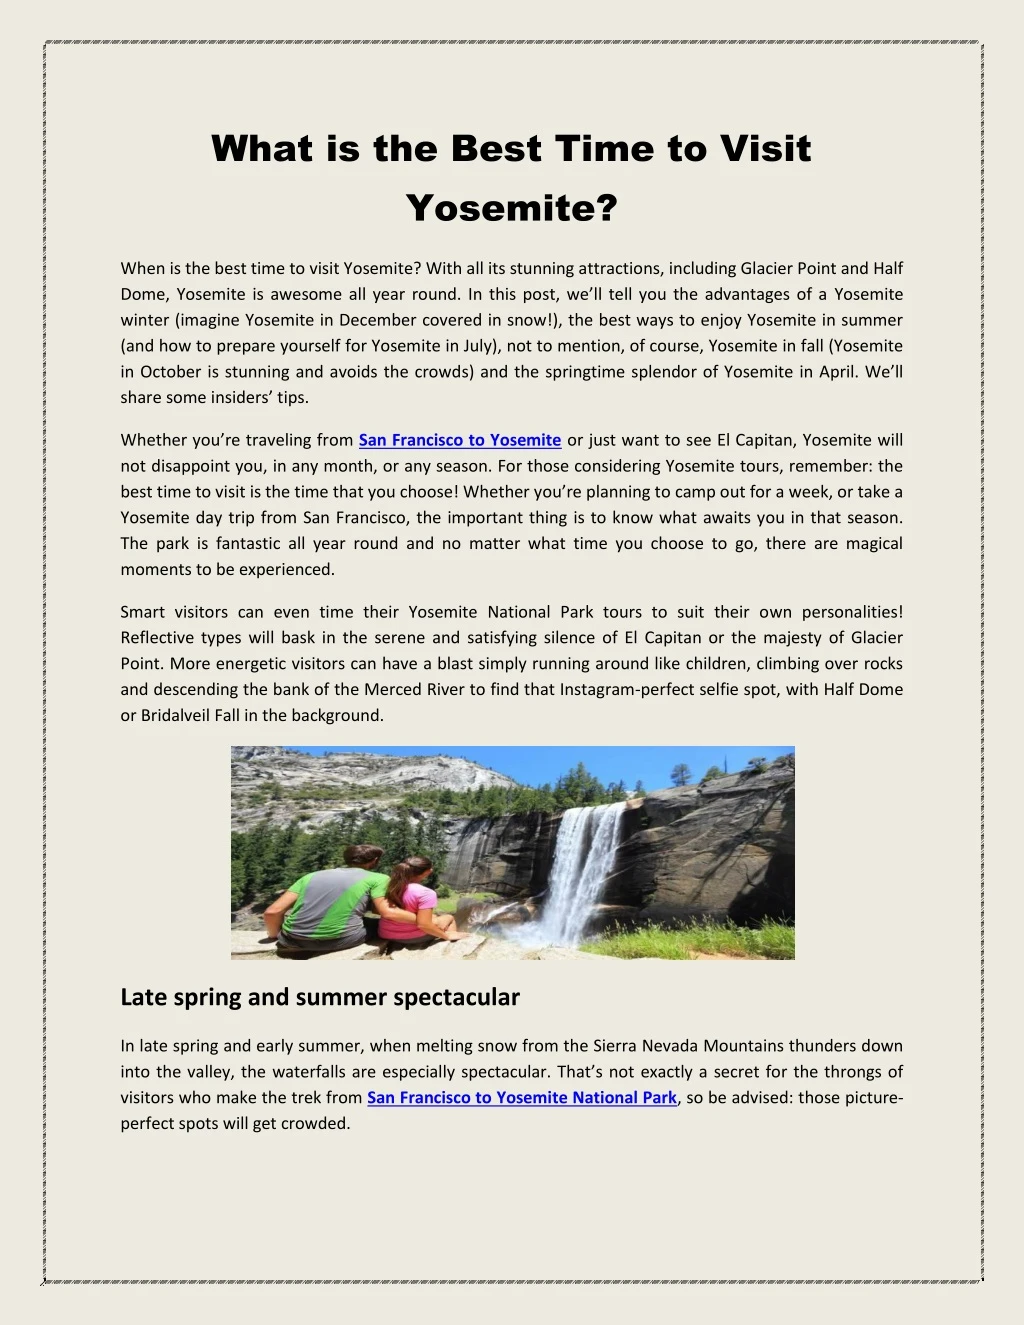 what is the best time to visit yosemite